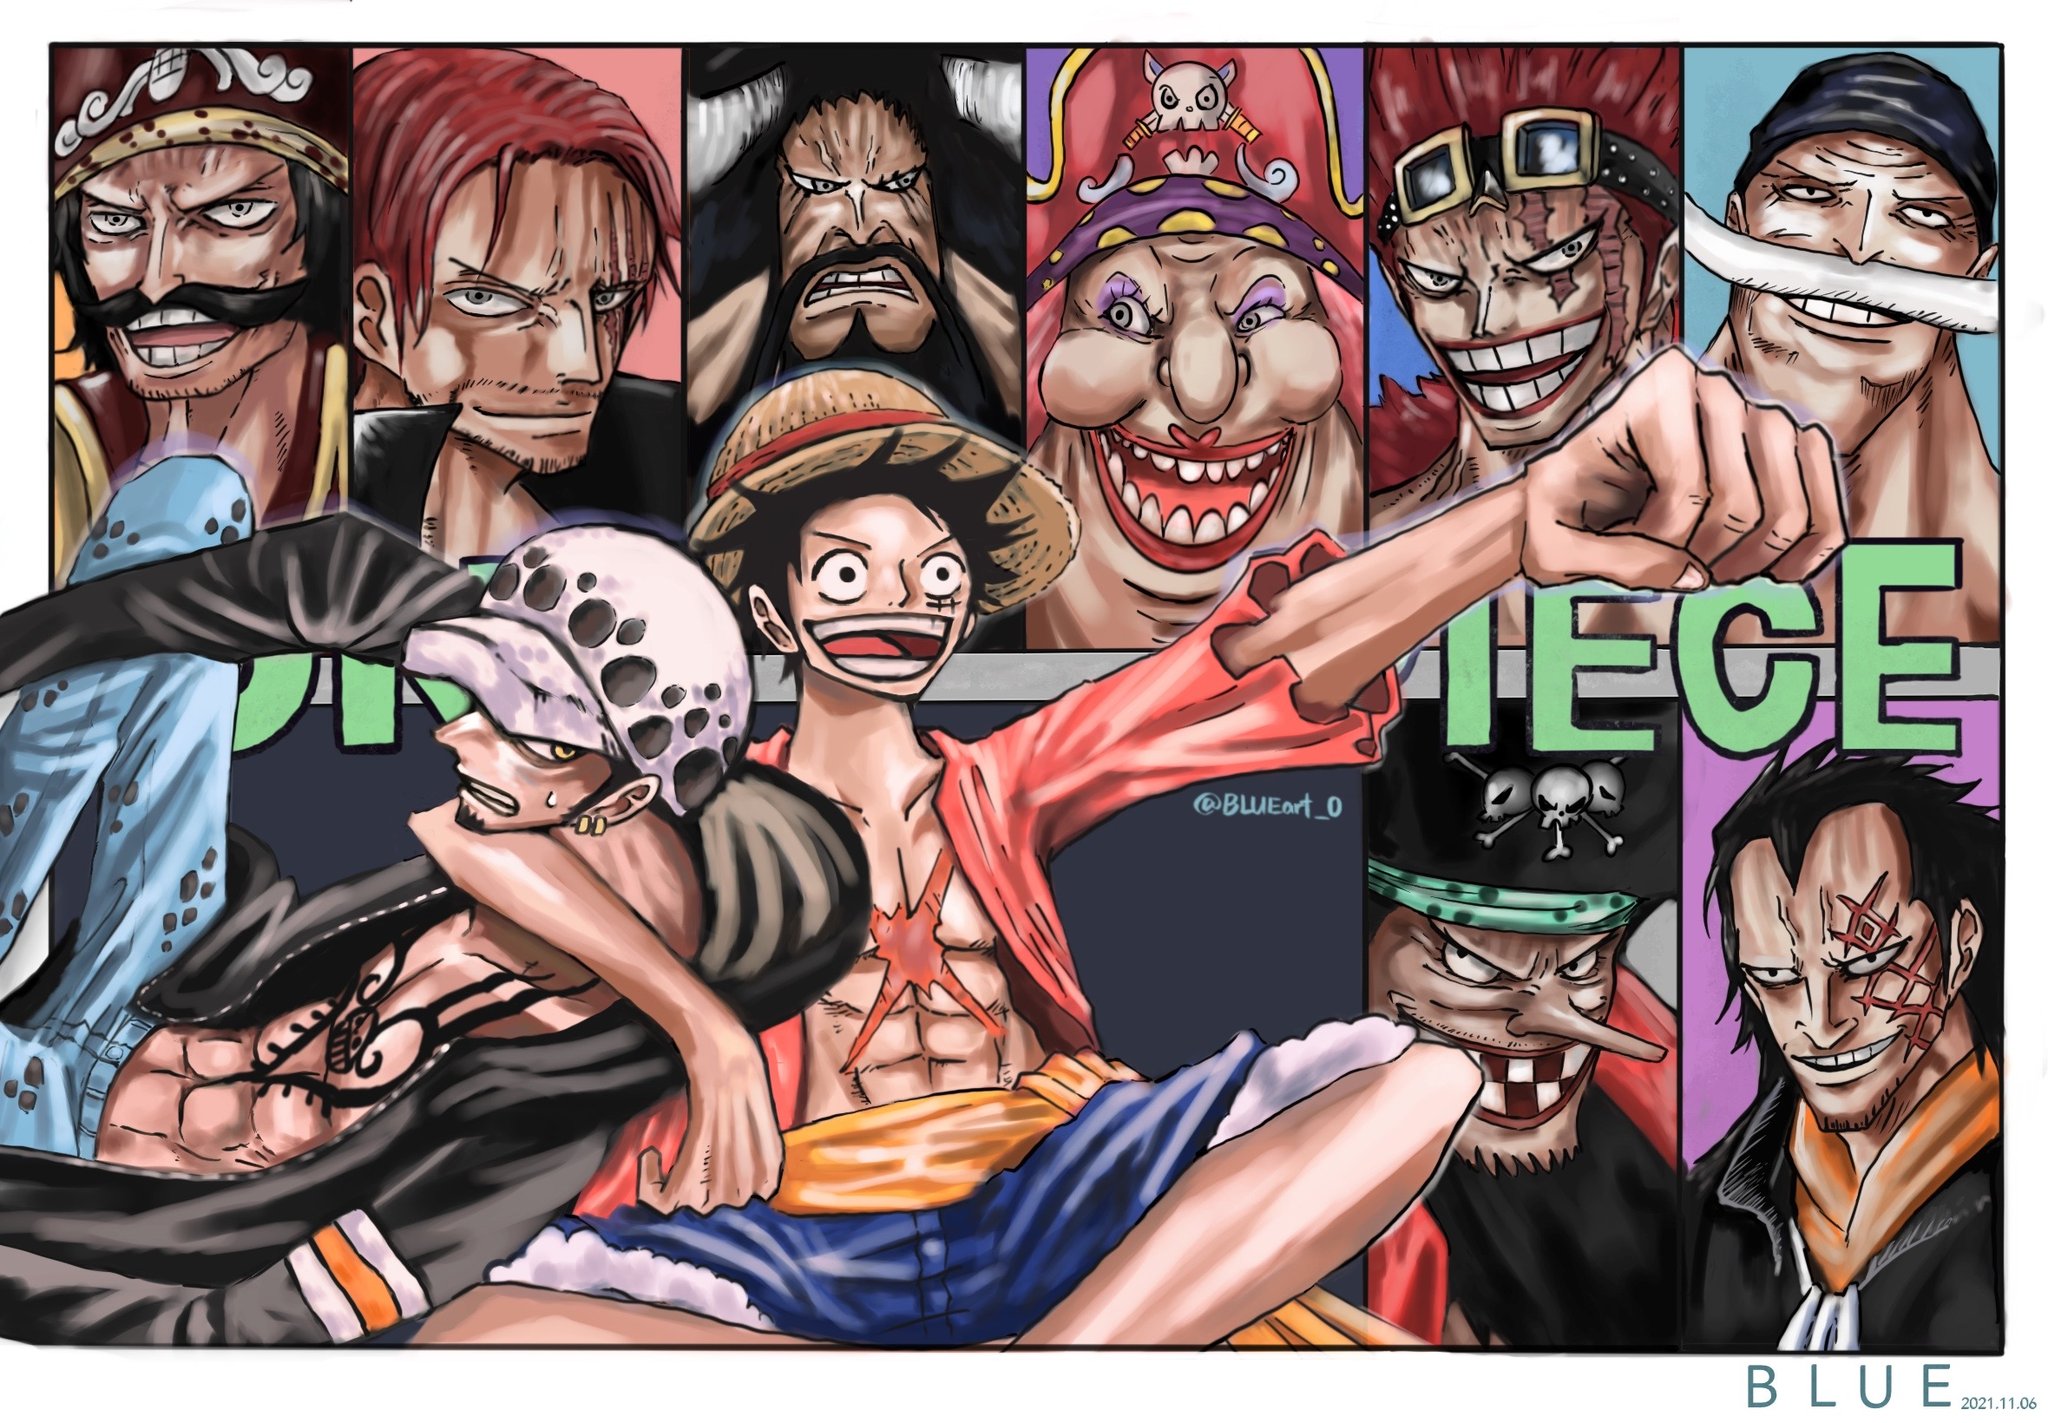 Blue Op1031 Colour Spread Captain Version Onepiece1031 トラファルガー ロー ルフィ Onepiecefanart ワンピース Onepiece T Co G8fadm7cge Twitter